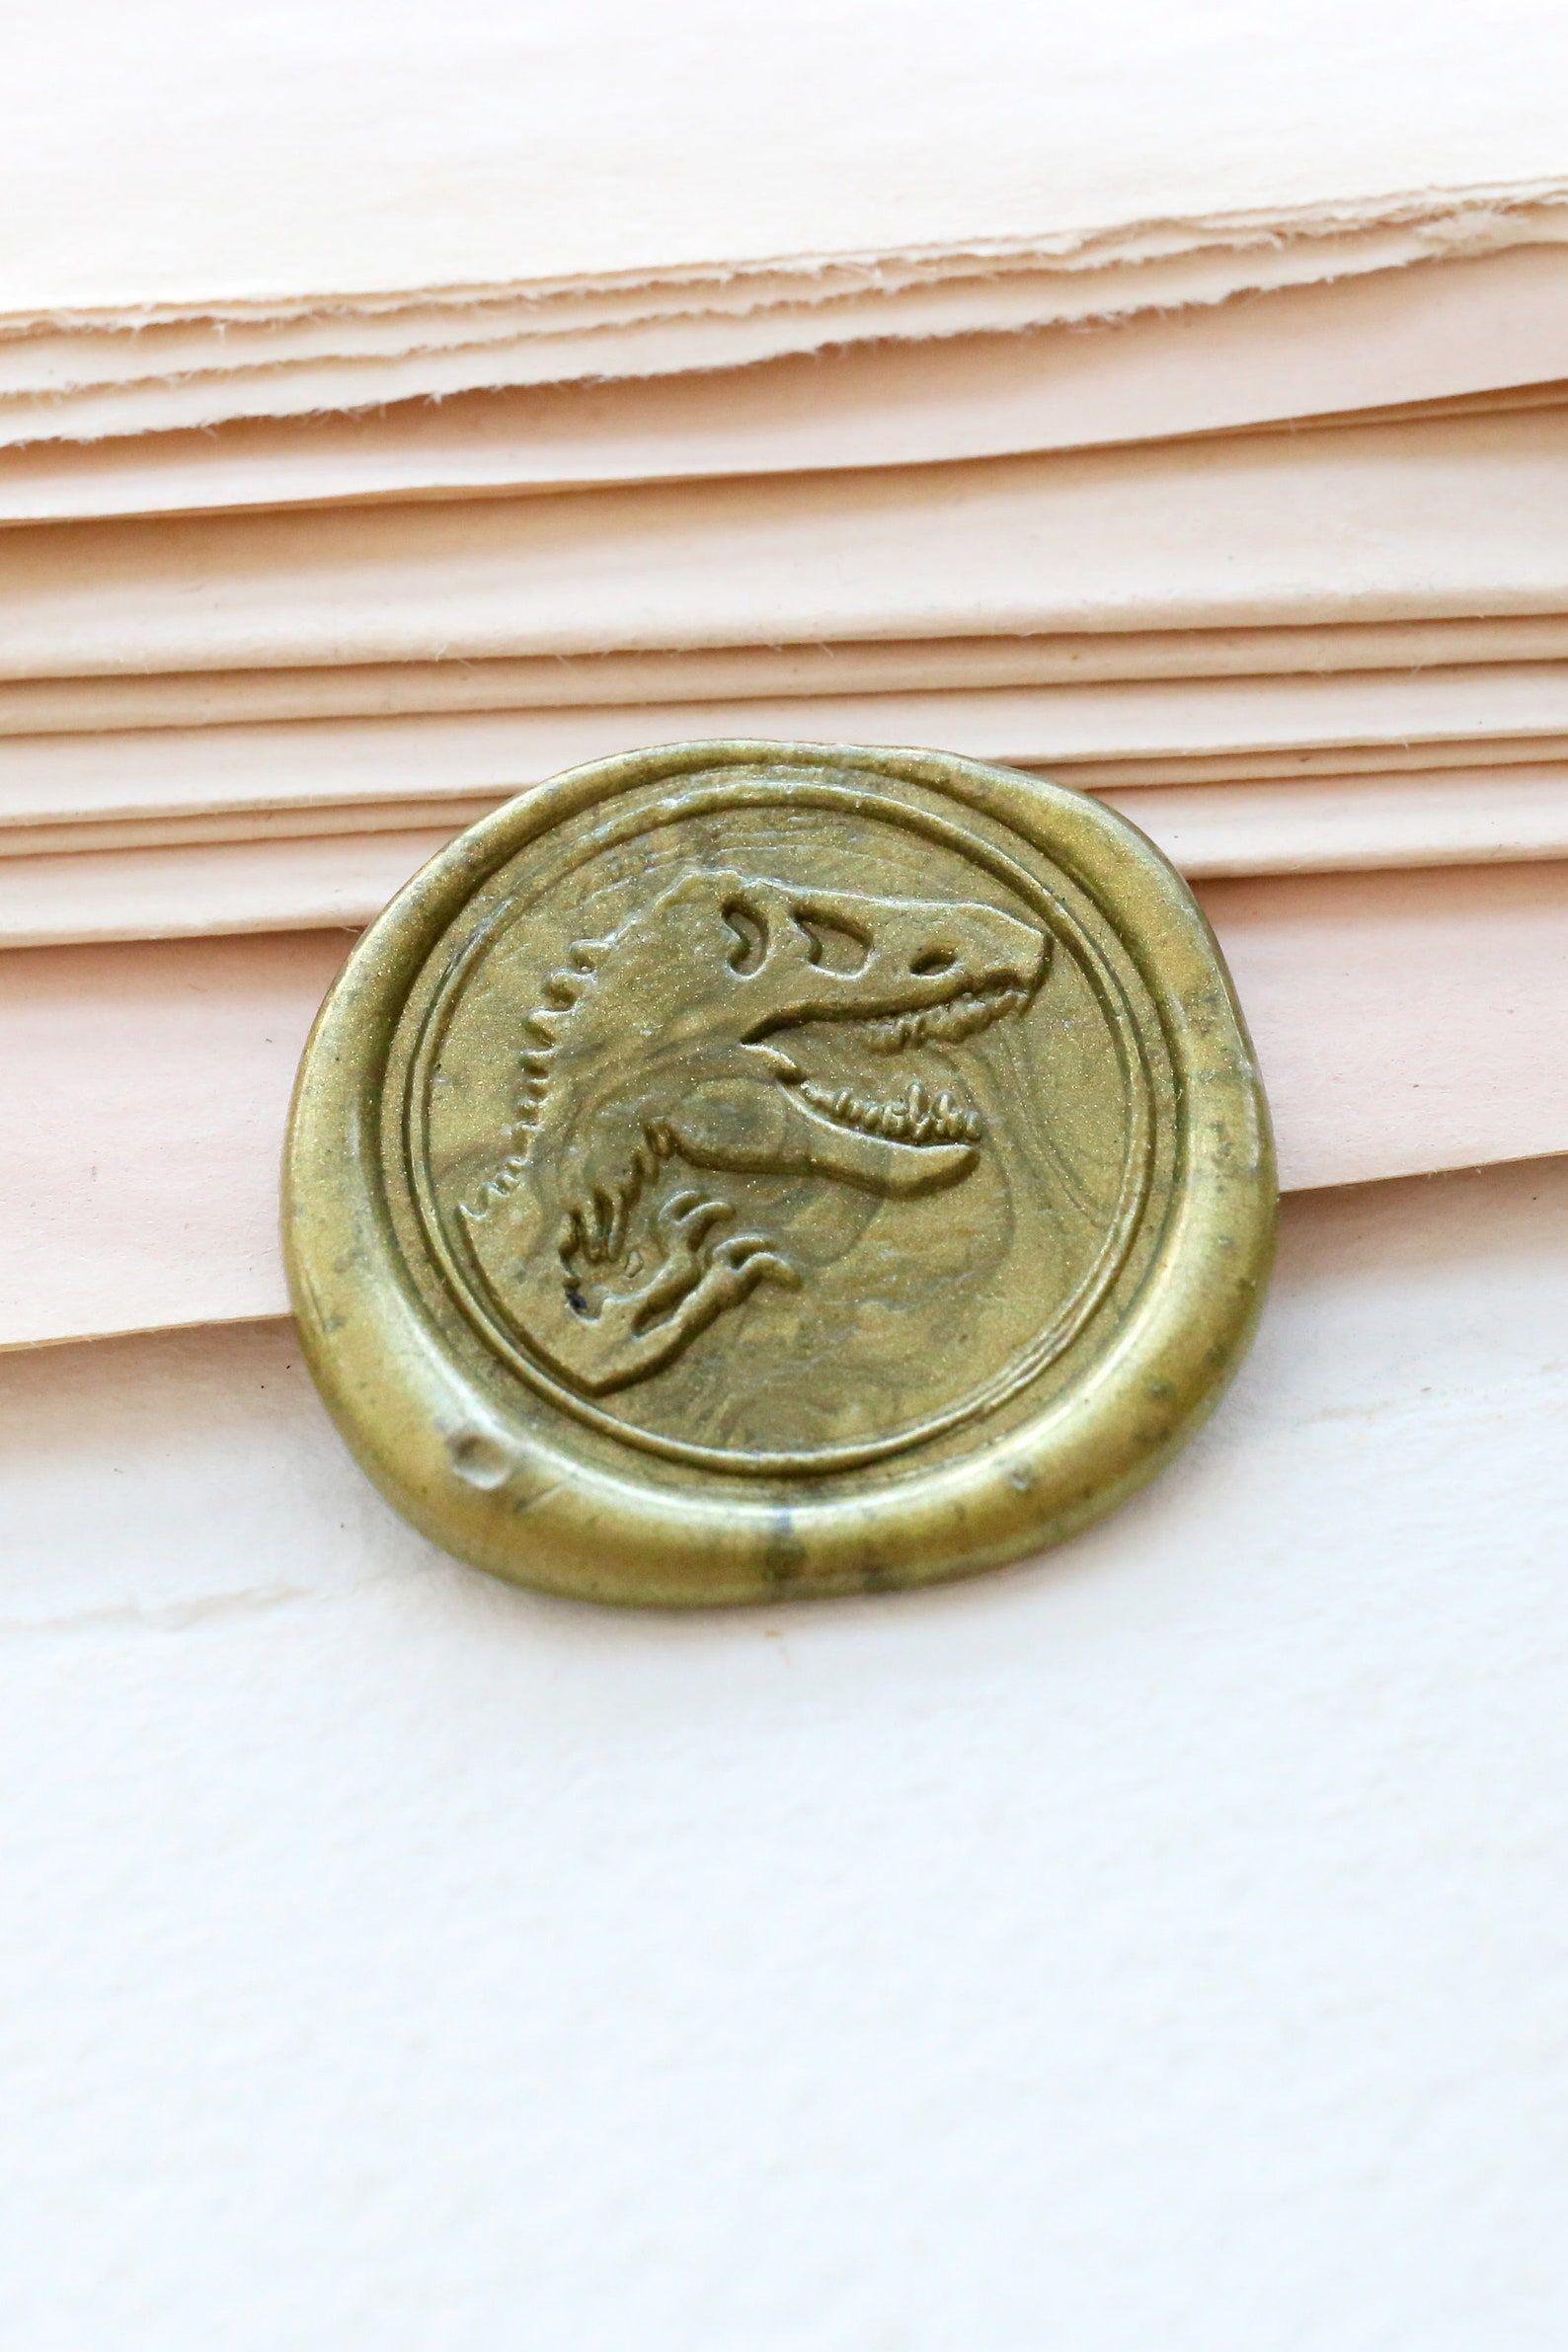 Image of a gold wax seal featuring a dinosaur.